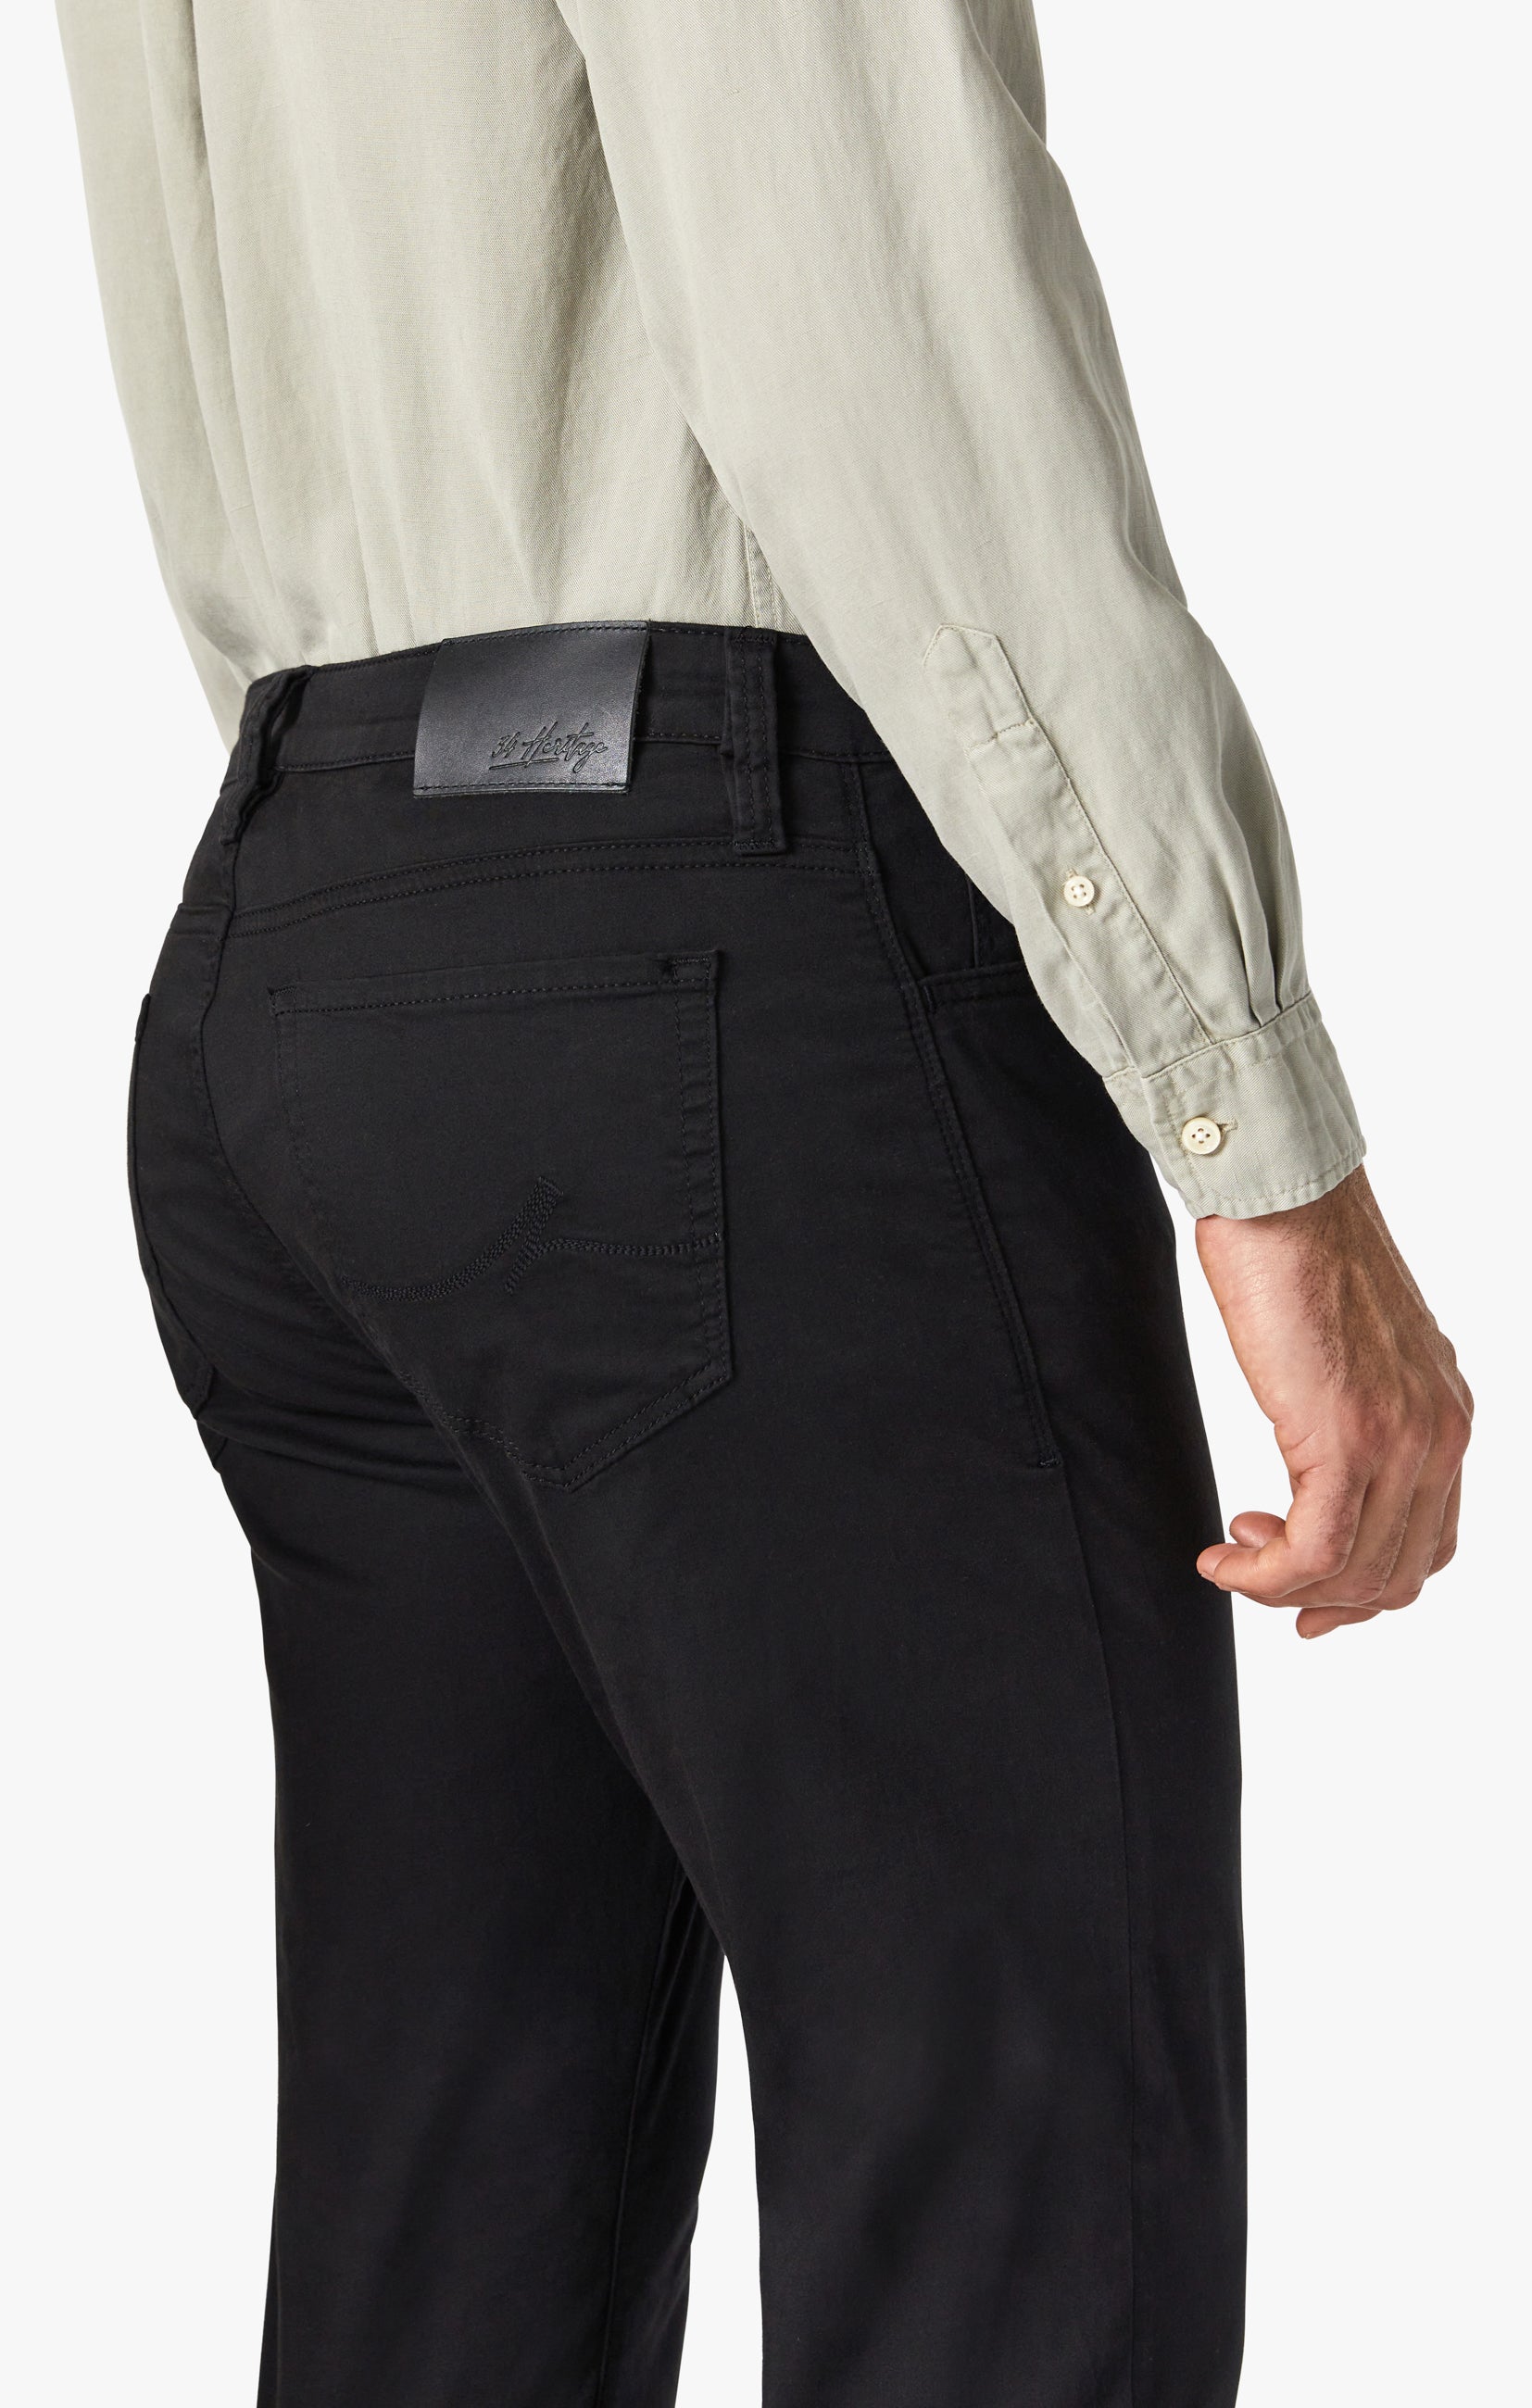 Courage Straight Leg Pants in Black Twill Image 3